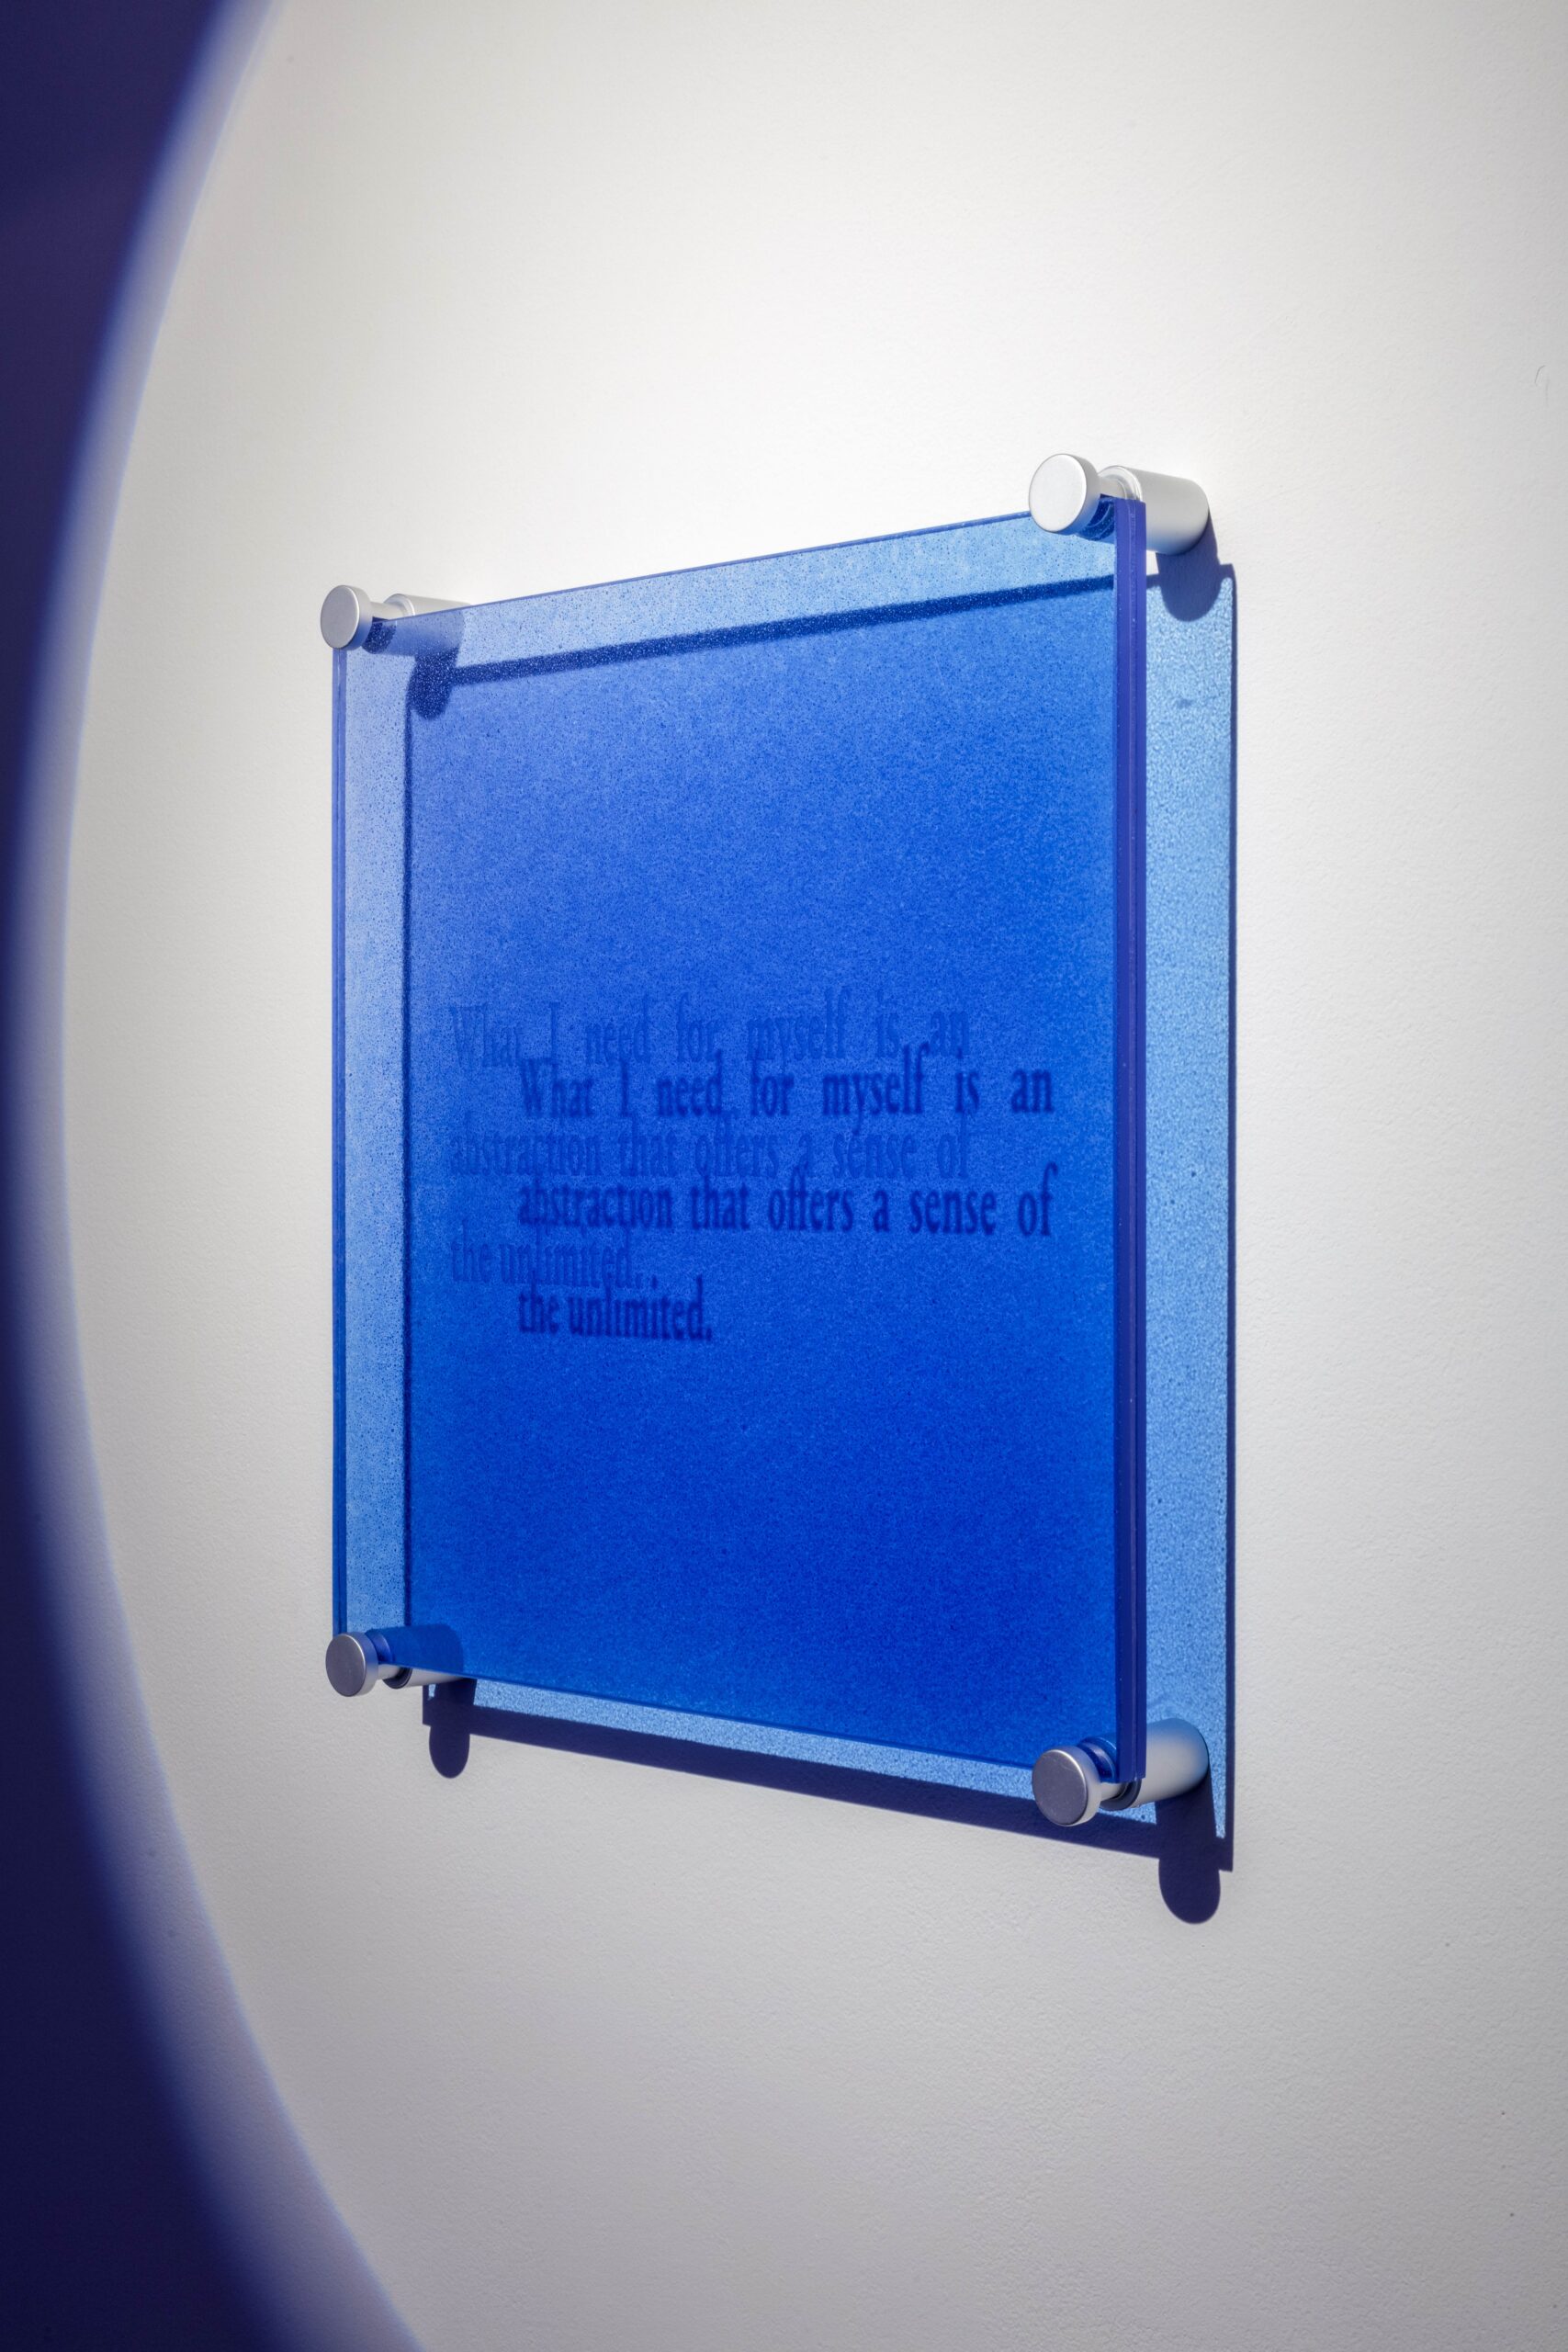 A blue glass square mounted on a wall, seen sideways, reads "What I need for myself is an abstraction that offers a sense of the unlimited."